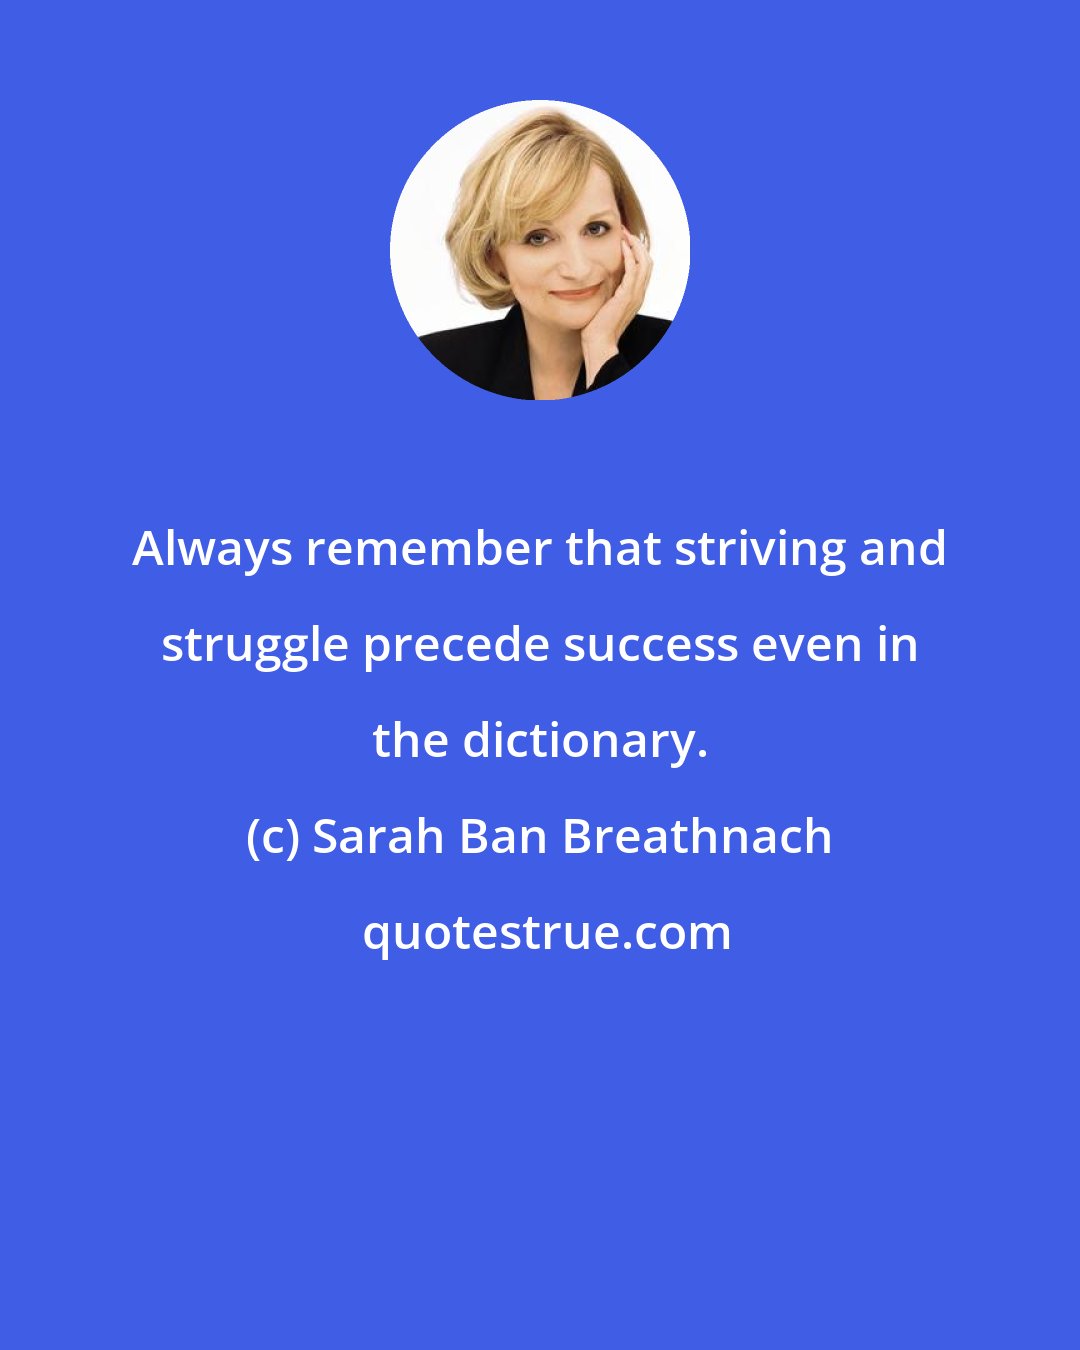 Sarah Ban Breathnach: Always remember that striving and struggle precede success even in the dictionary.